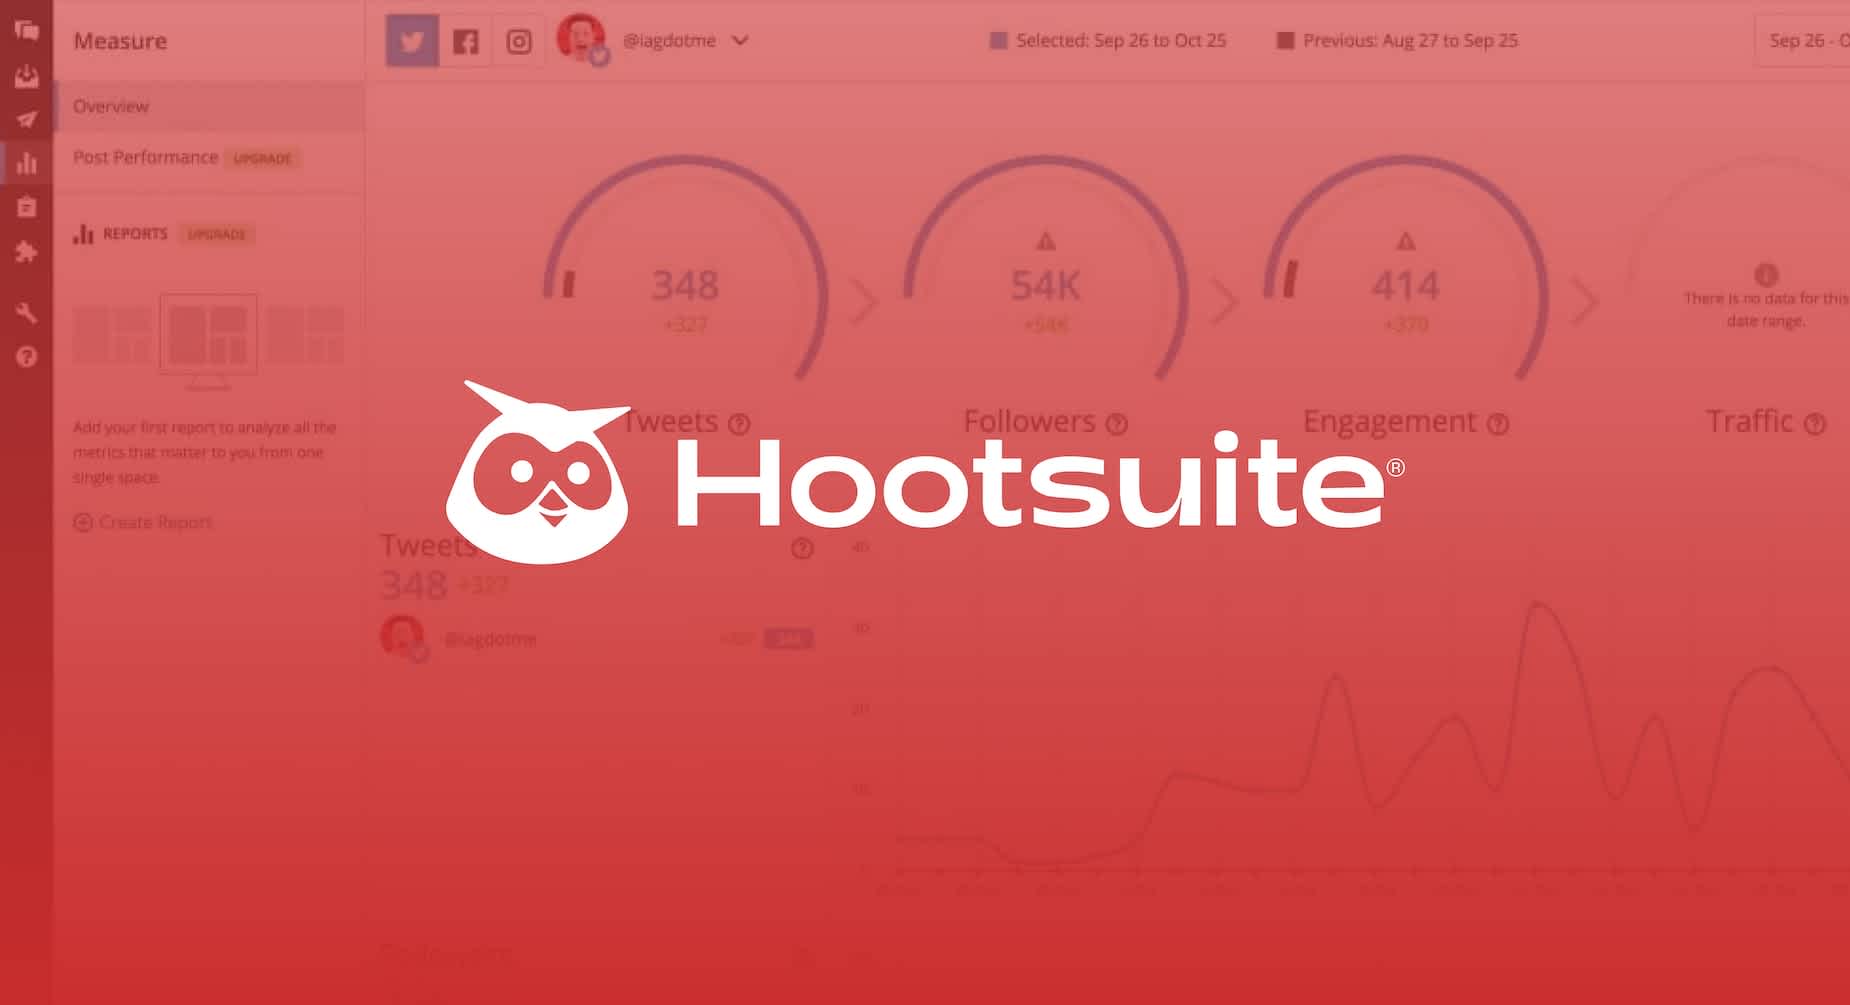 Hootsuite logo over a red background